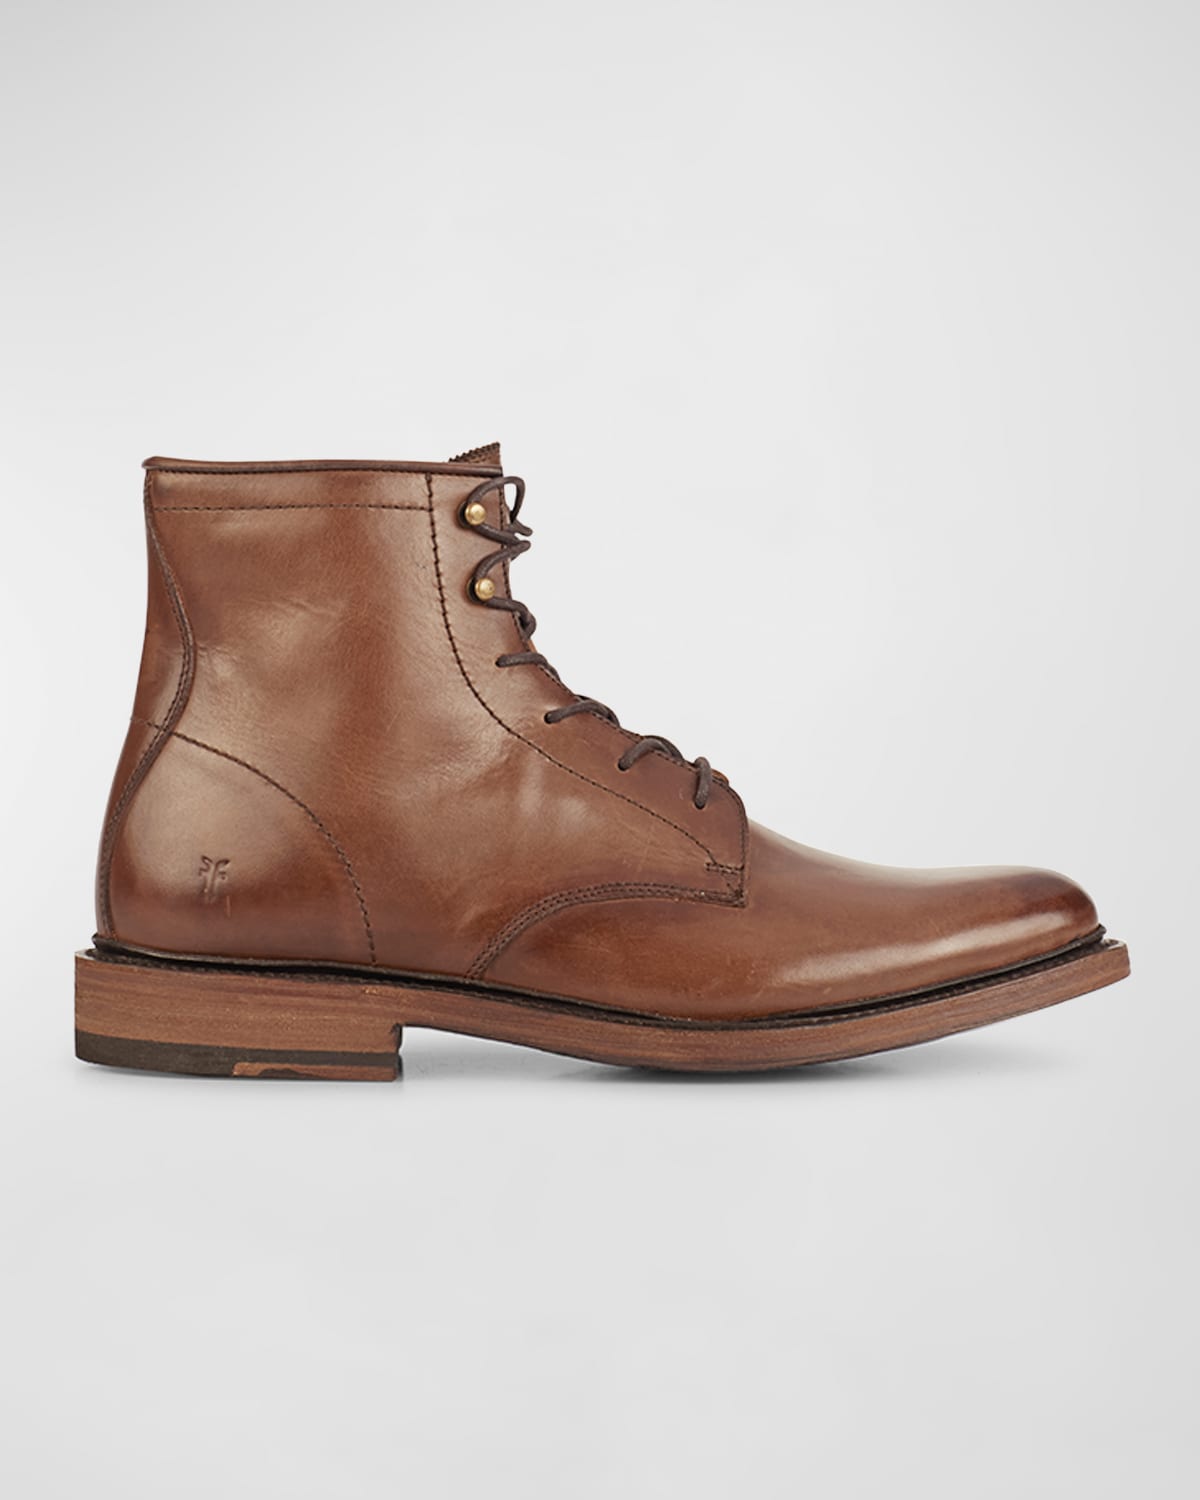 FRYE MEN'S JAMES LACE-UP LEATHER BOOTS